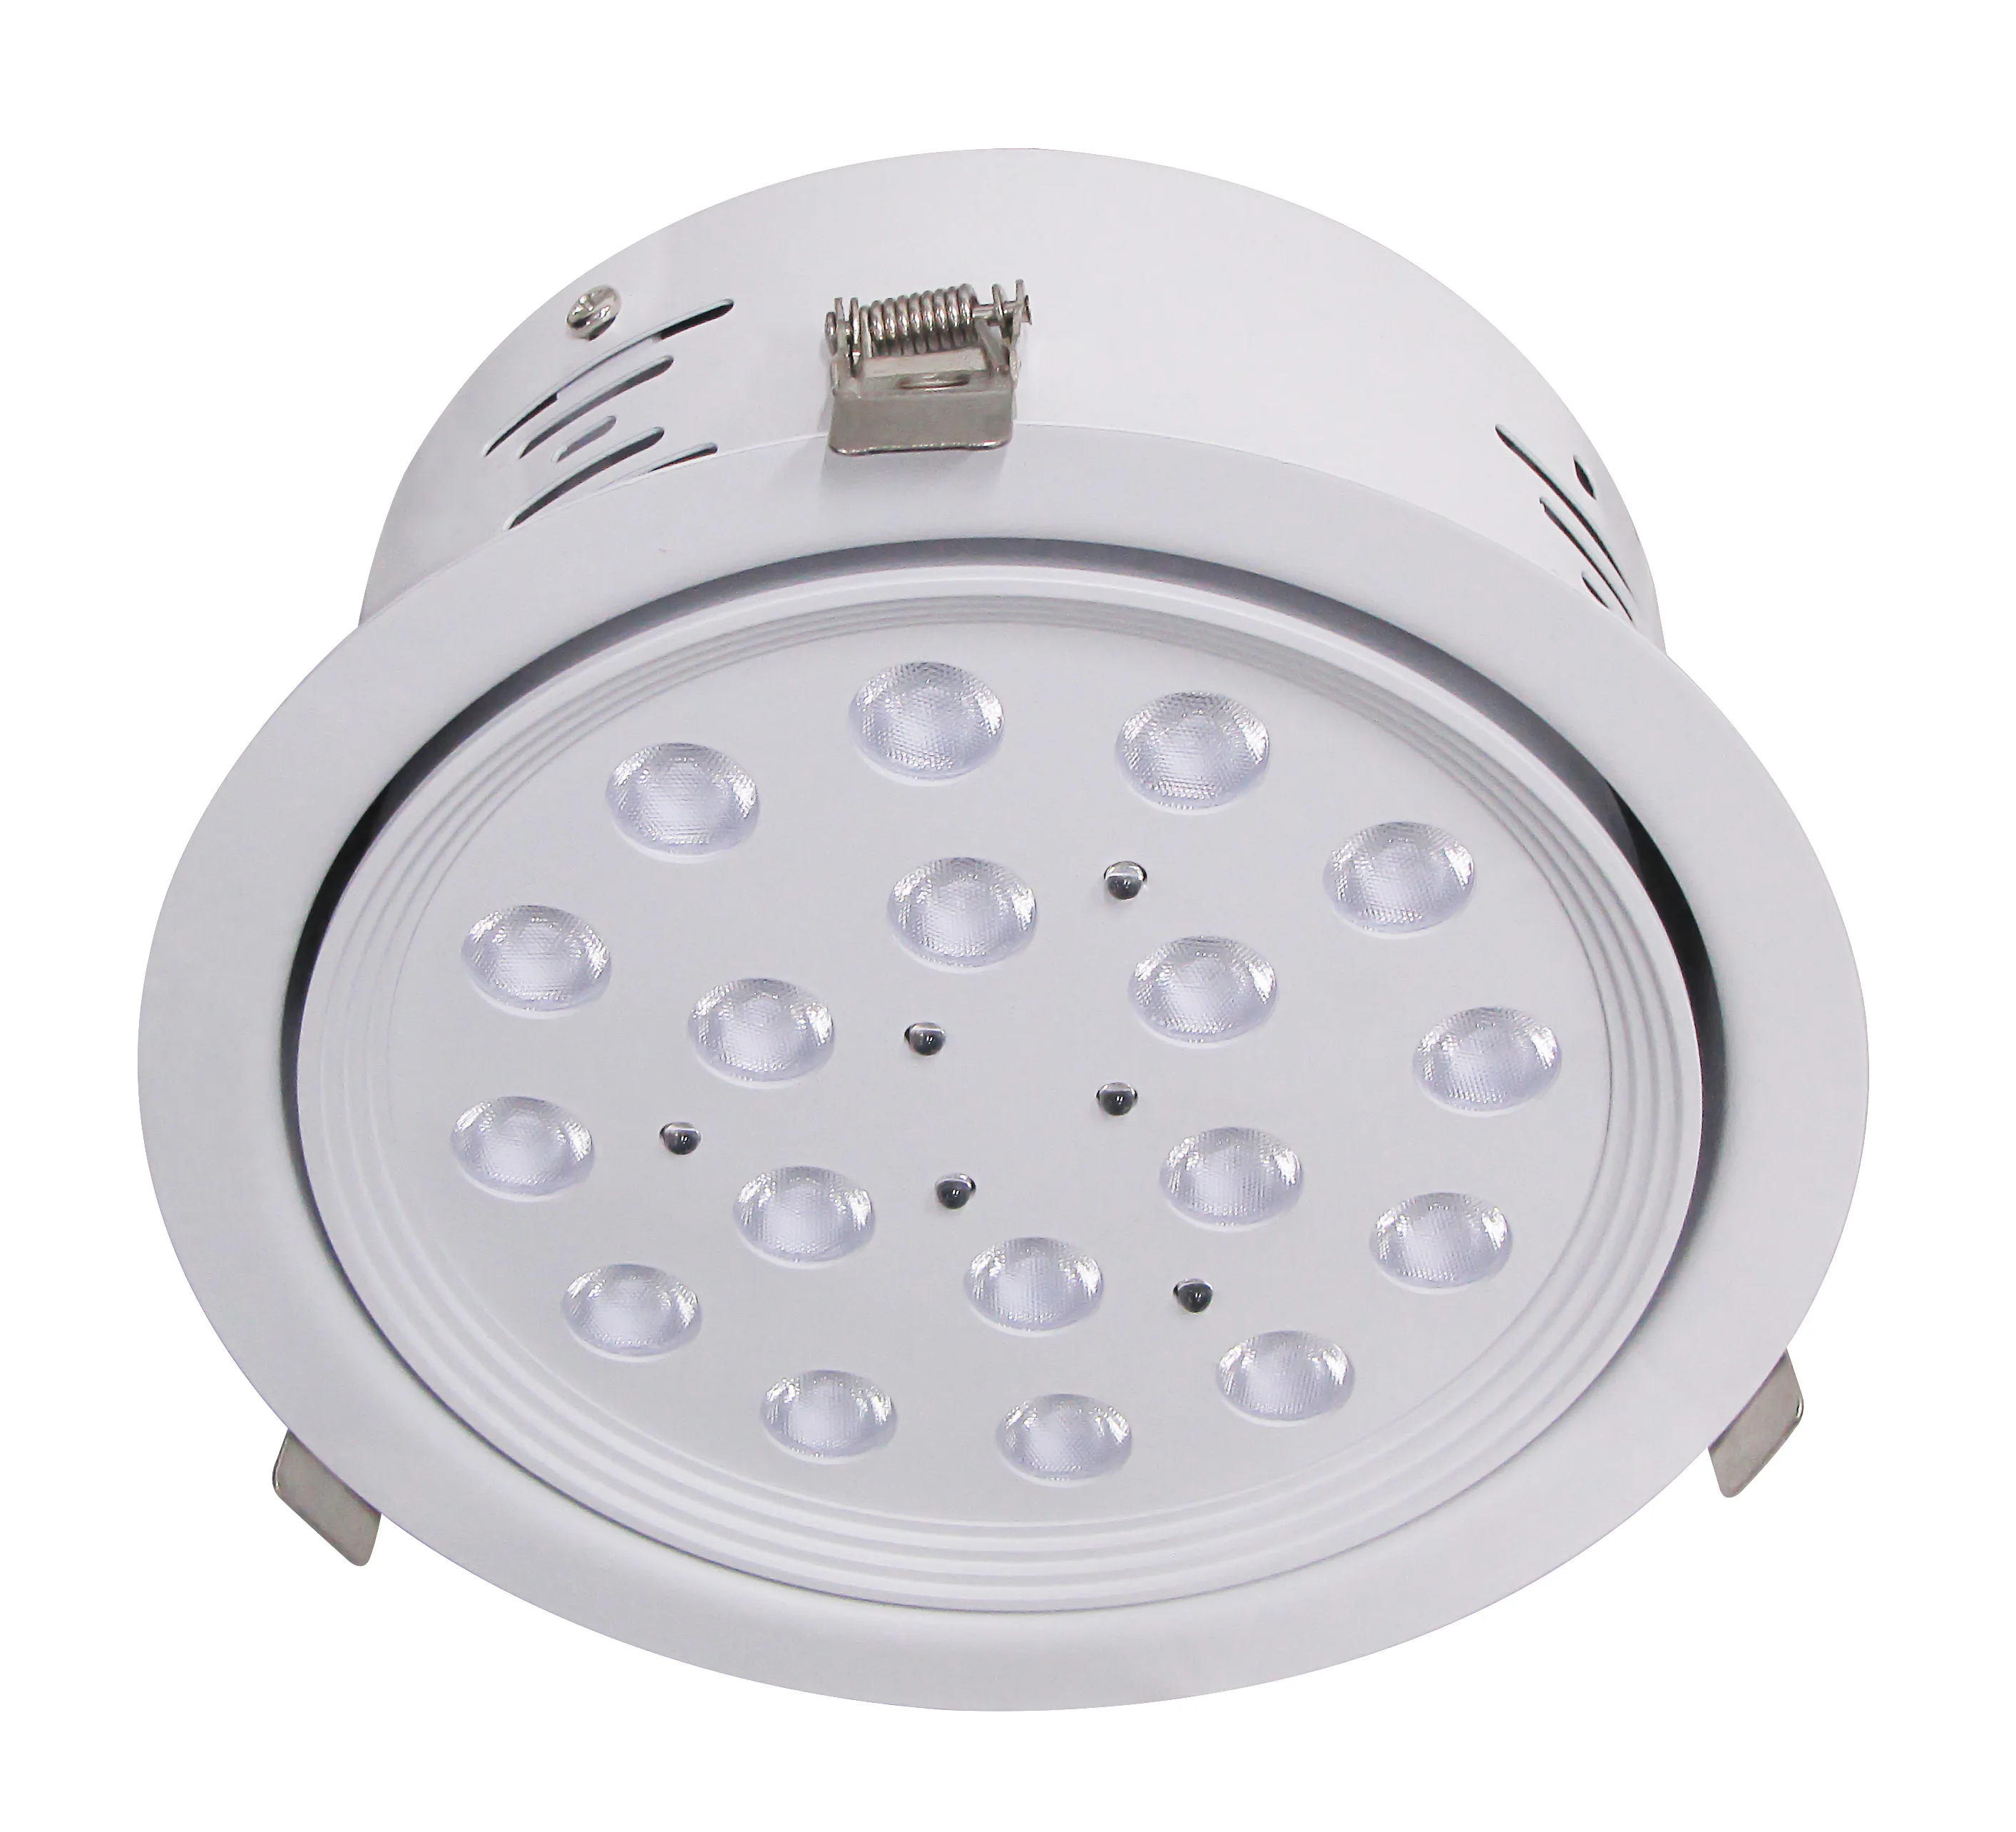 jewelry rotating Dimmable Under Cabinet Lighting RGB LED Light Remote Control Lamp Multicolor Under Counter Lights